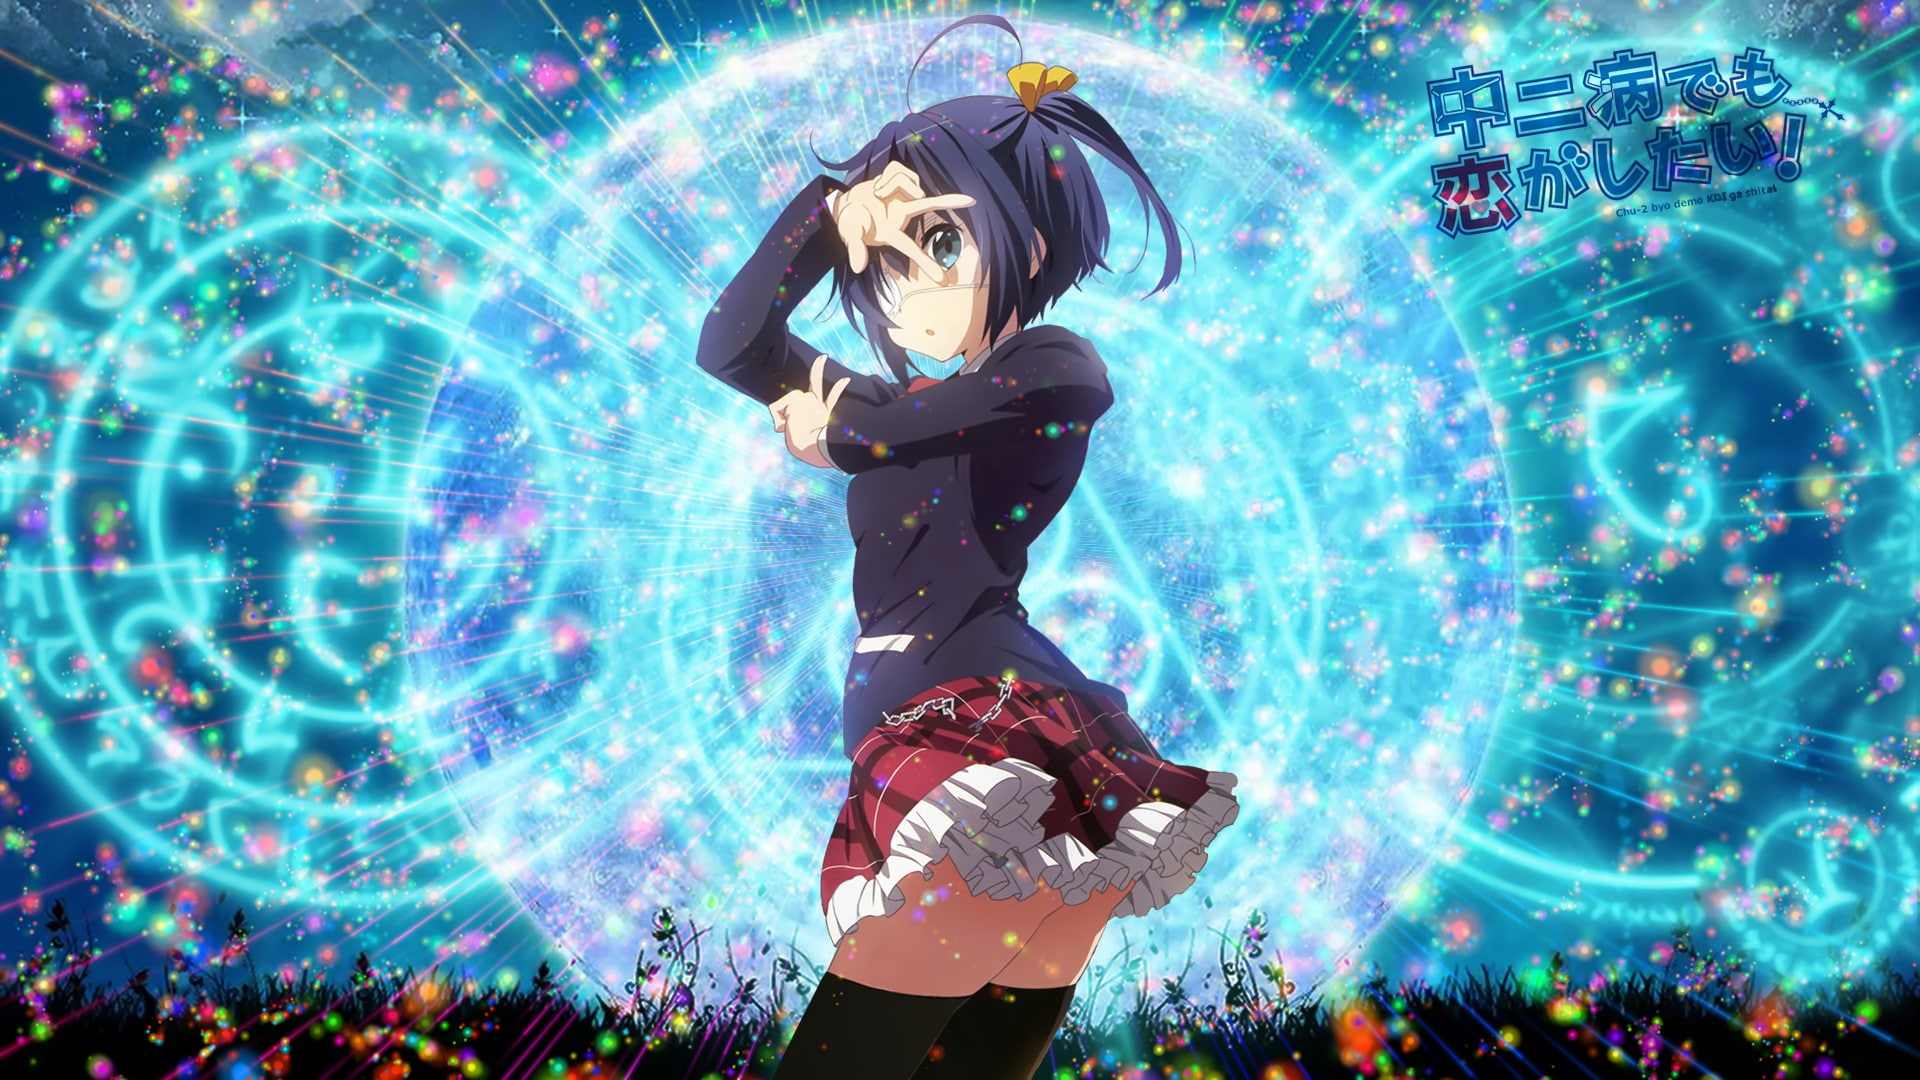 Free Download Hd Wallpaper Anime Love Chunibyo And Other Delusions Eye Patch Girl 